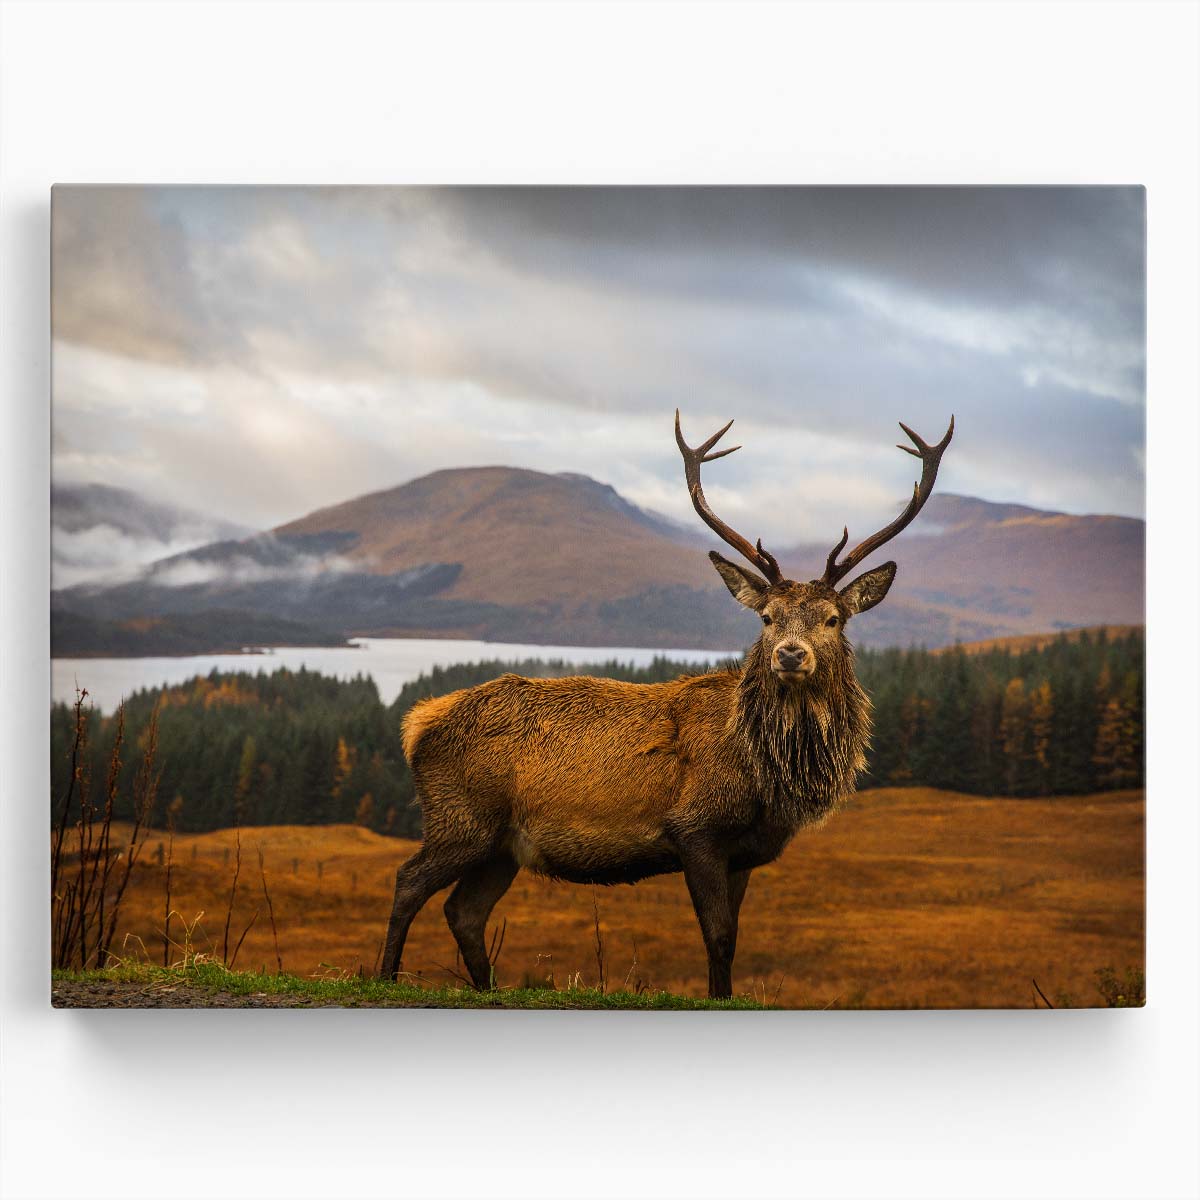 Scottish Highlands Deer & Mountain Lake Landscape Photo Wall Art by Luxuriance Designs. Made in USA.